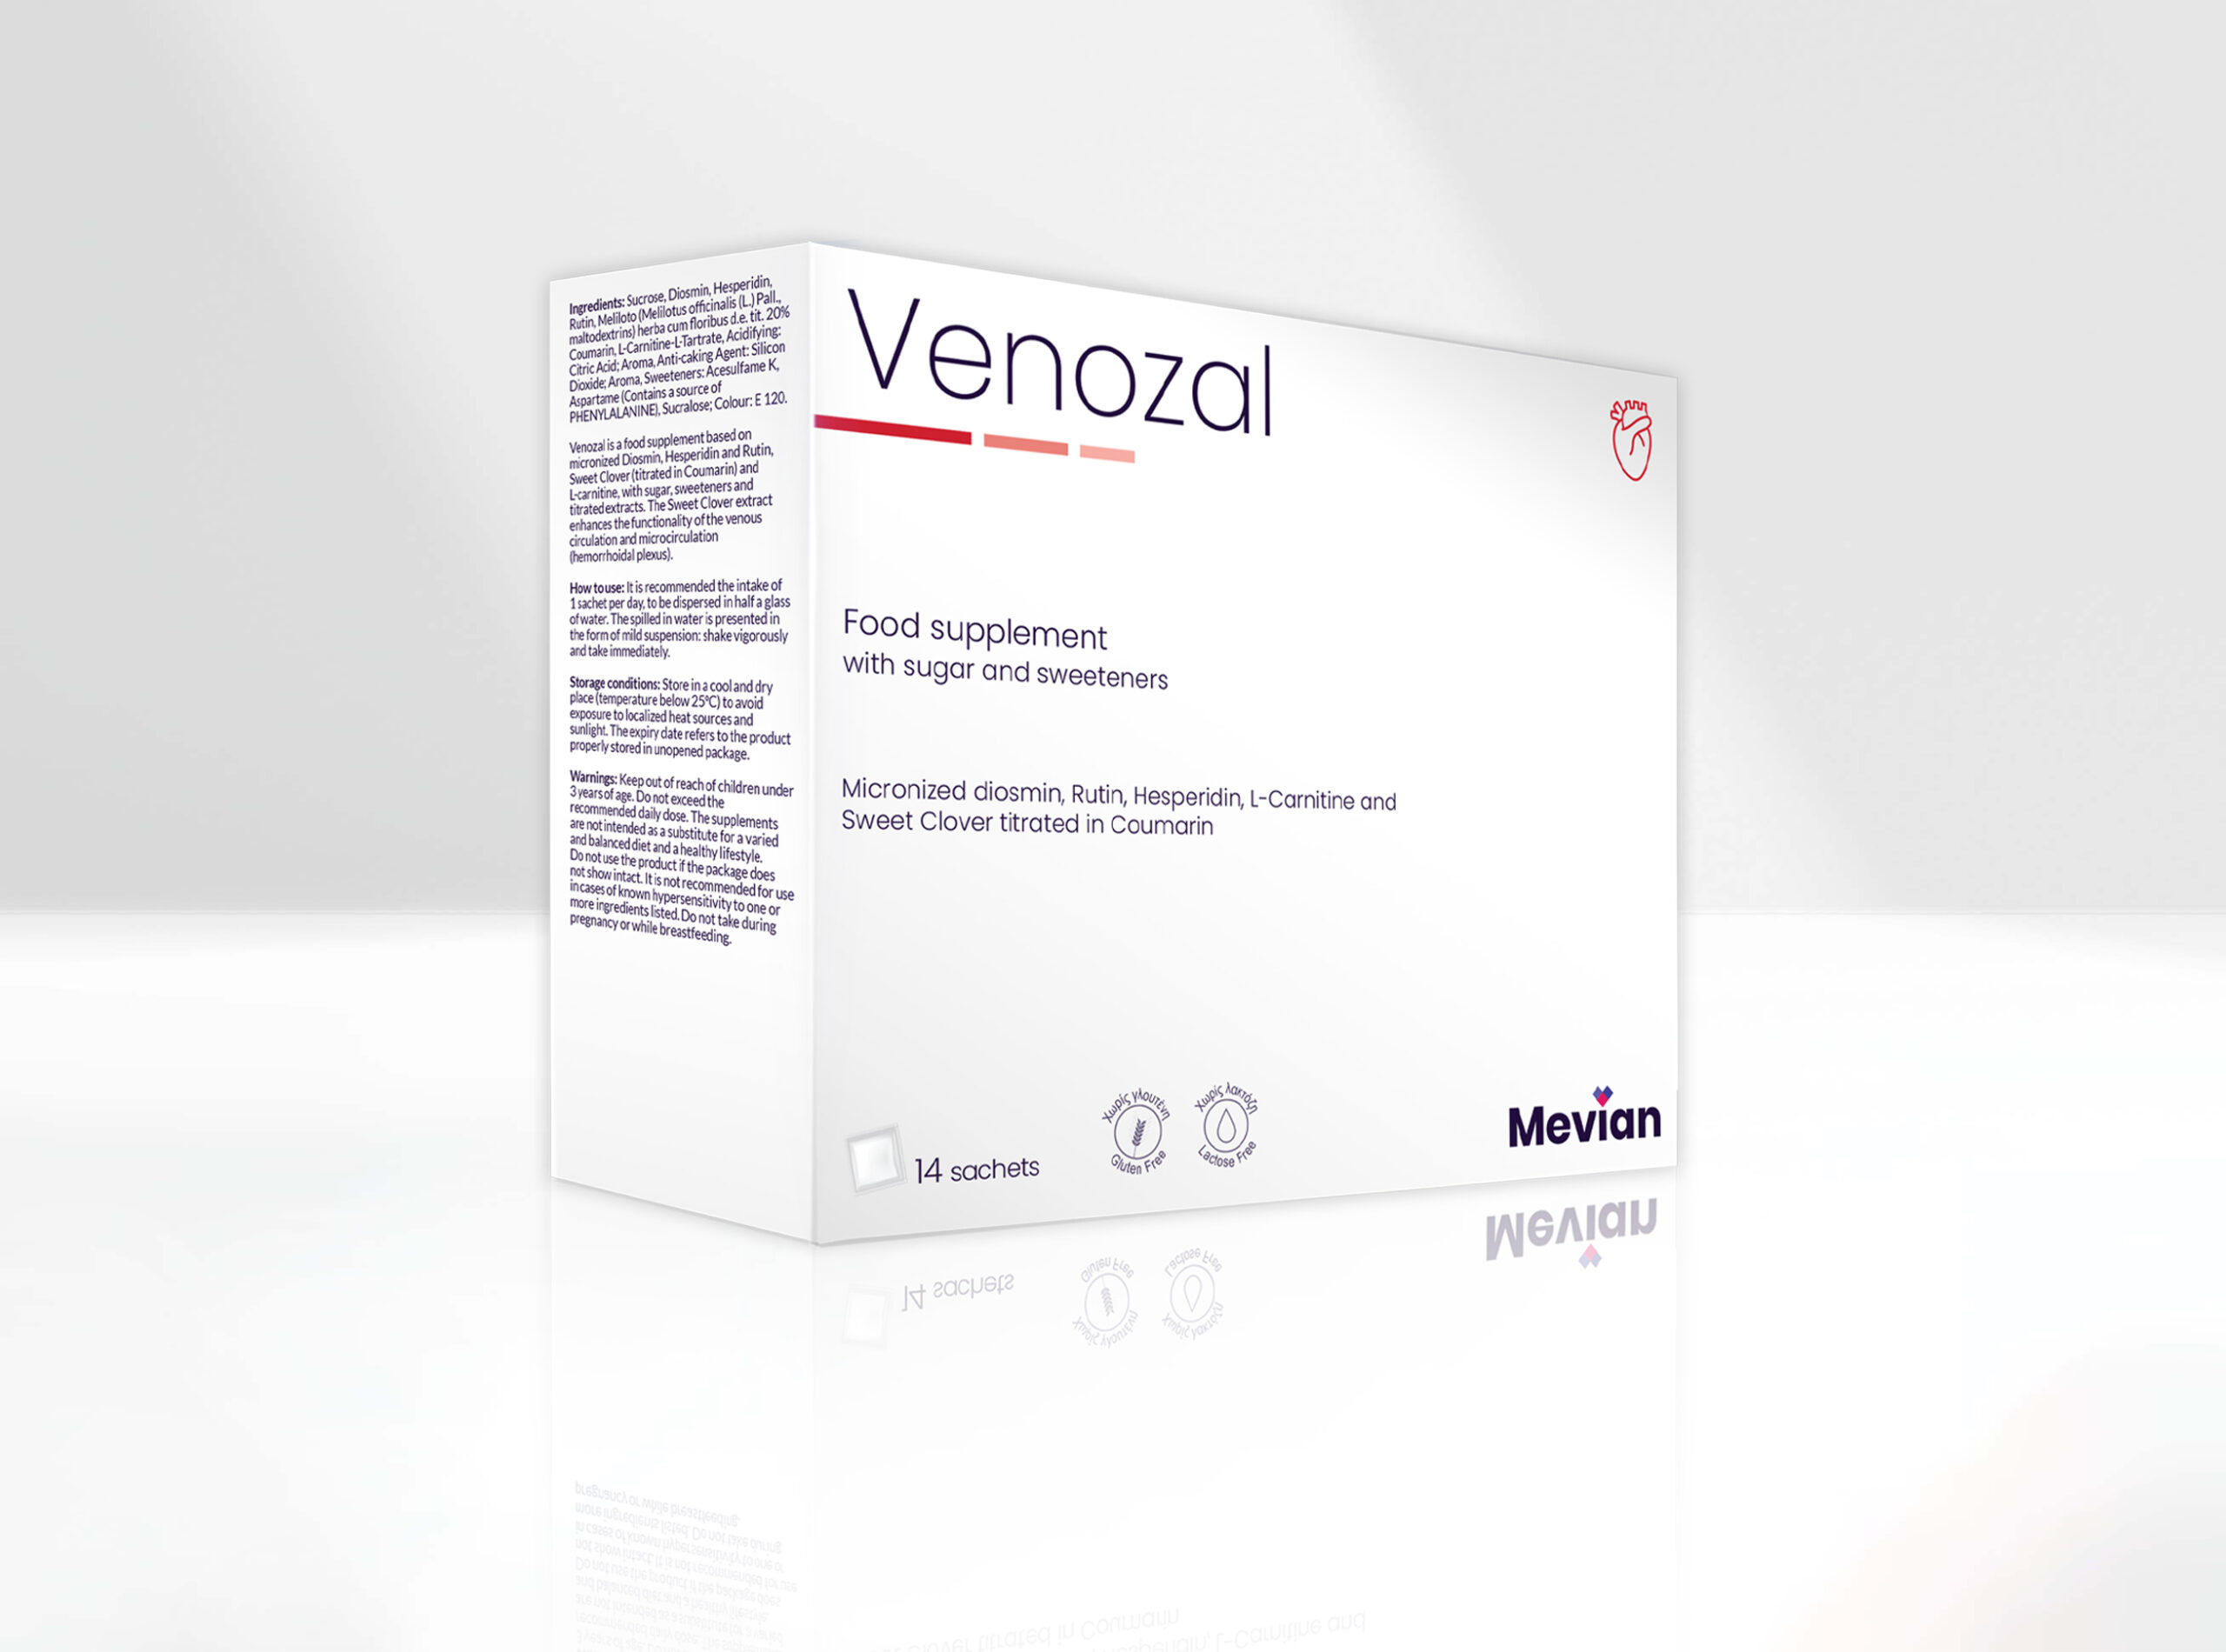 Venozal is an ideal product that enables venous circulation and microcirculation (Highlighted Capillaries and Varicose Veins Pain and Cramping).